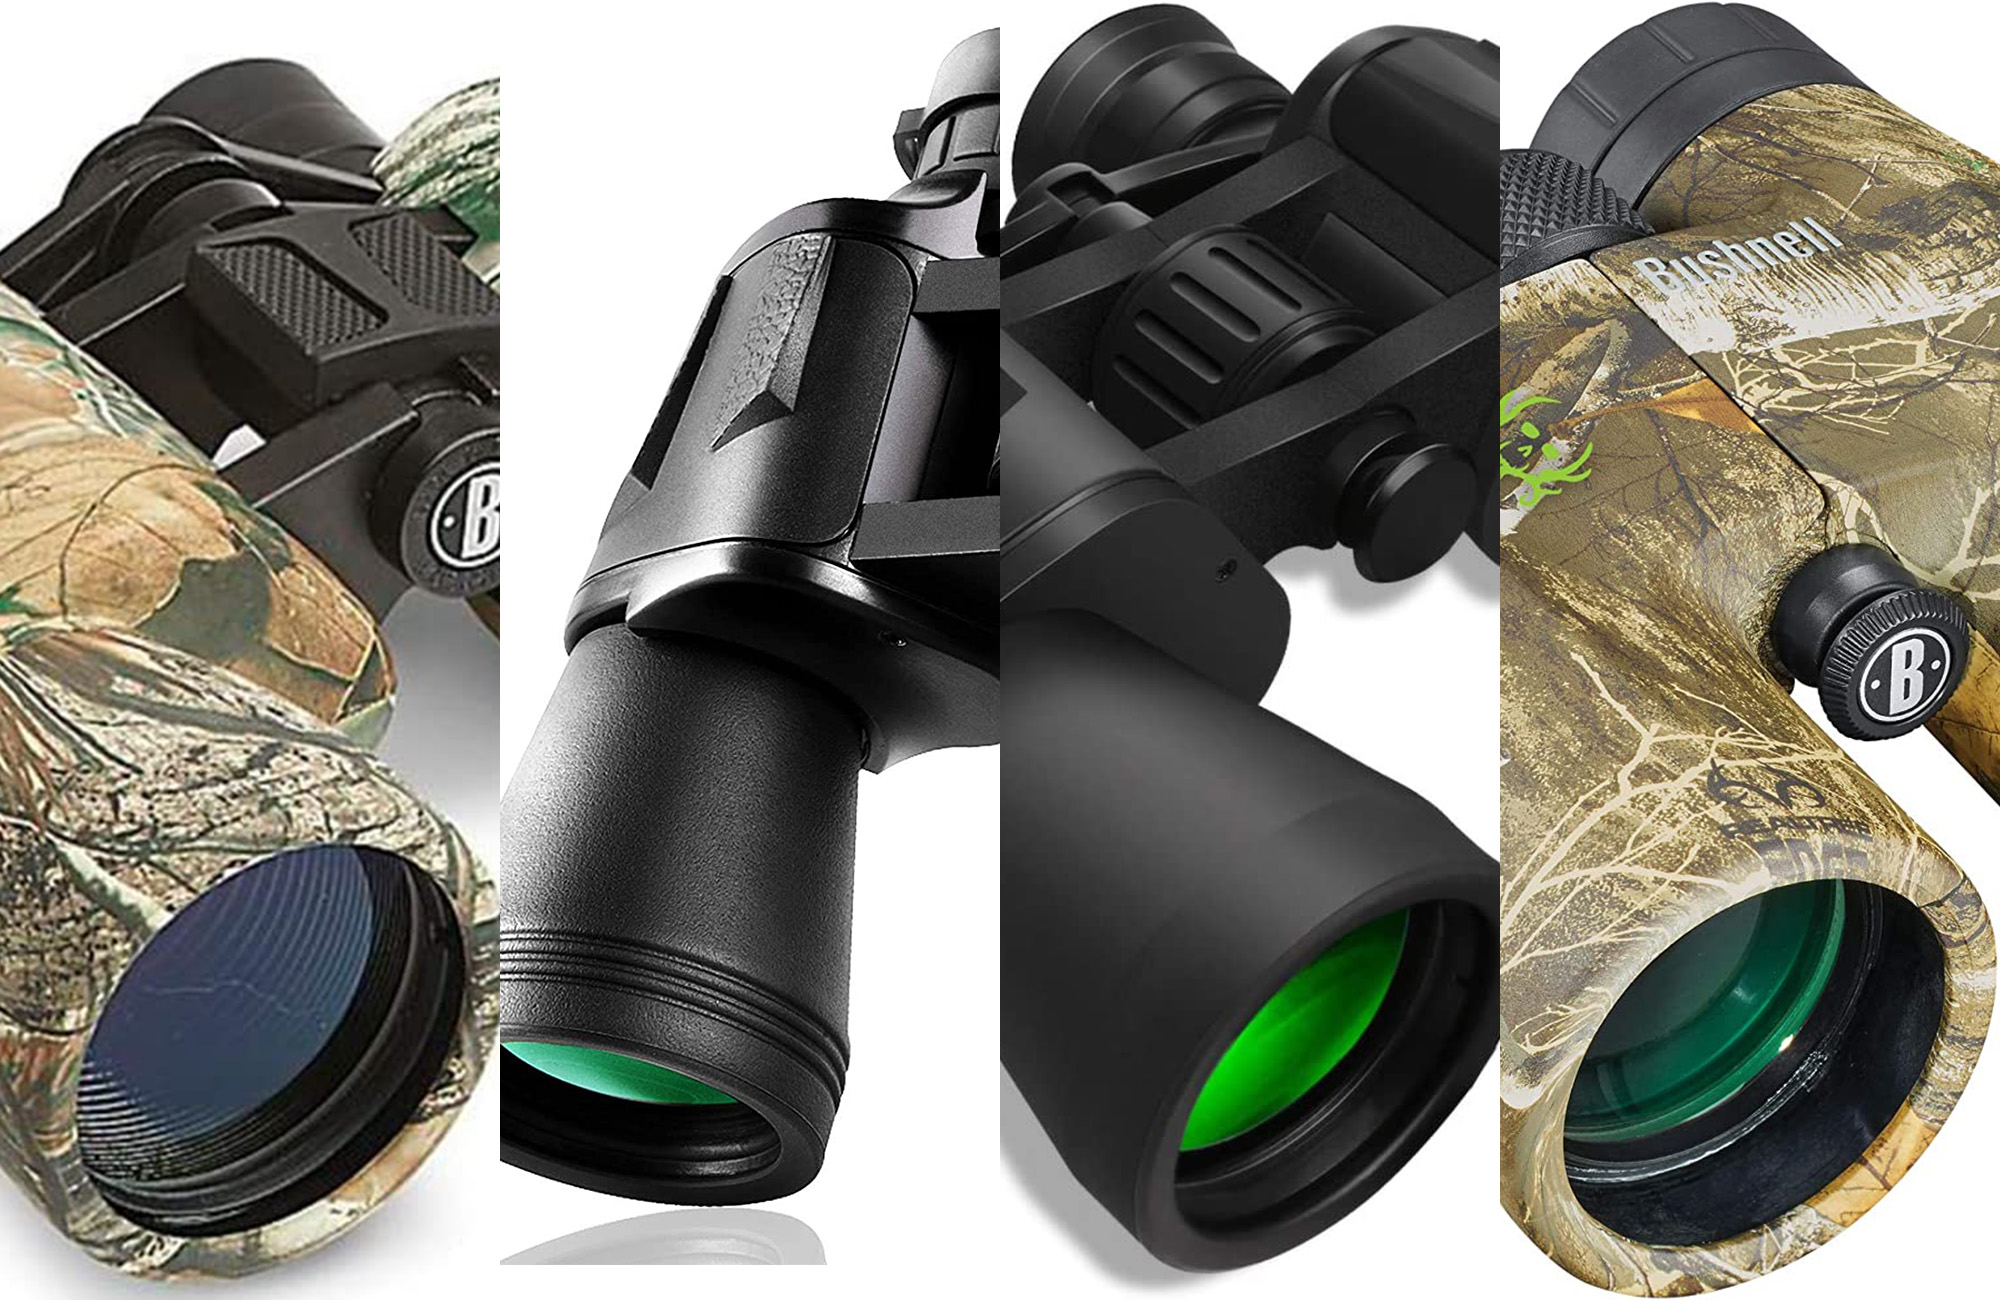 Focus on these Amazon Prime Day Early Access binocular deals